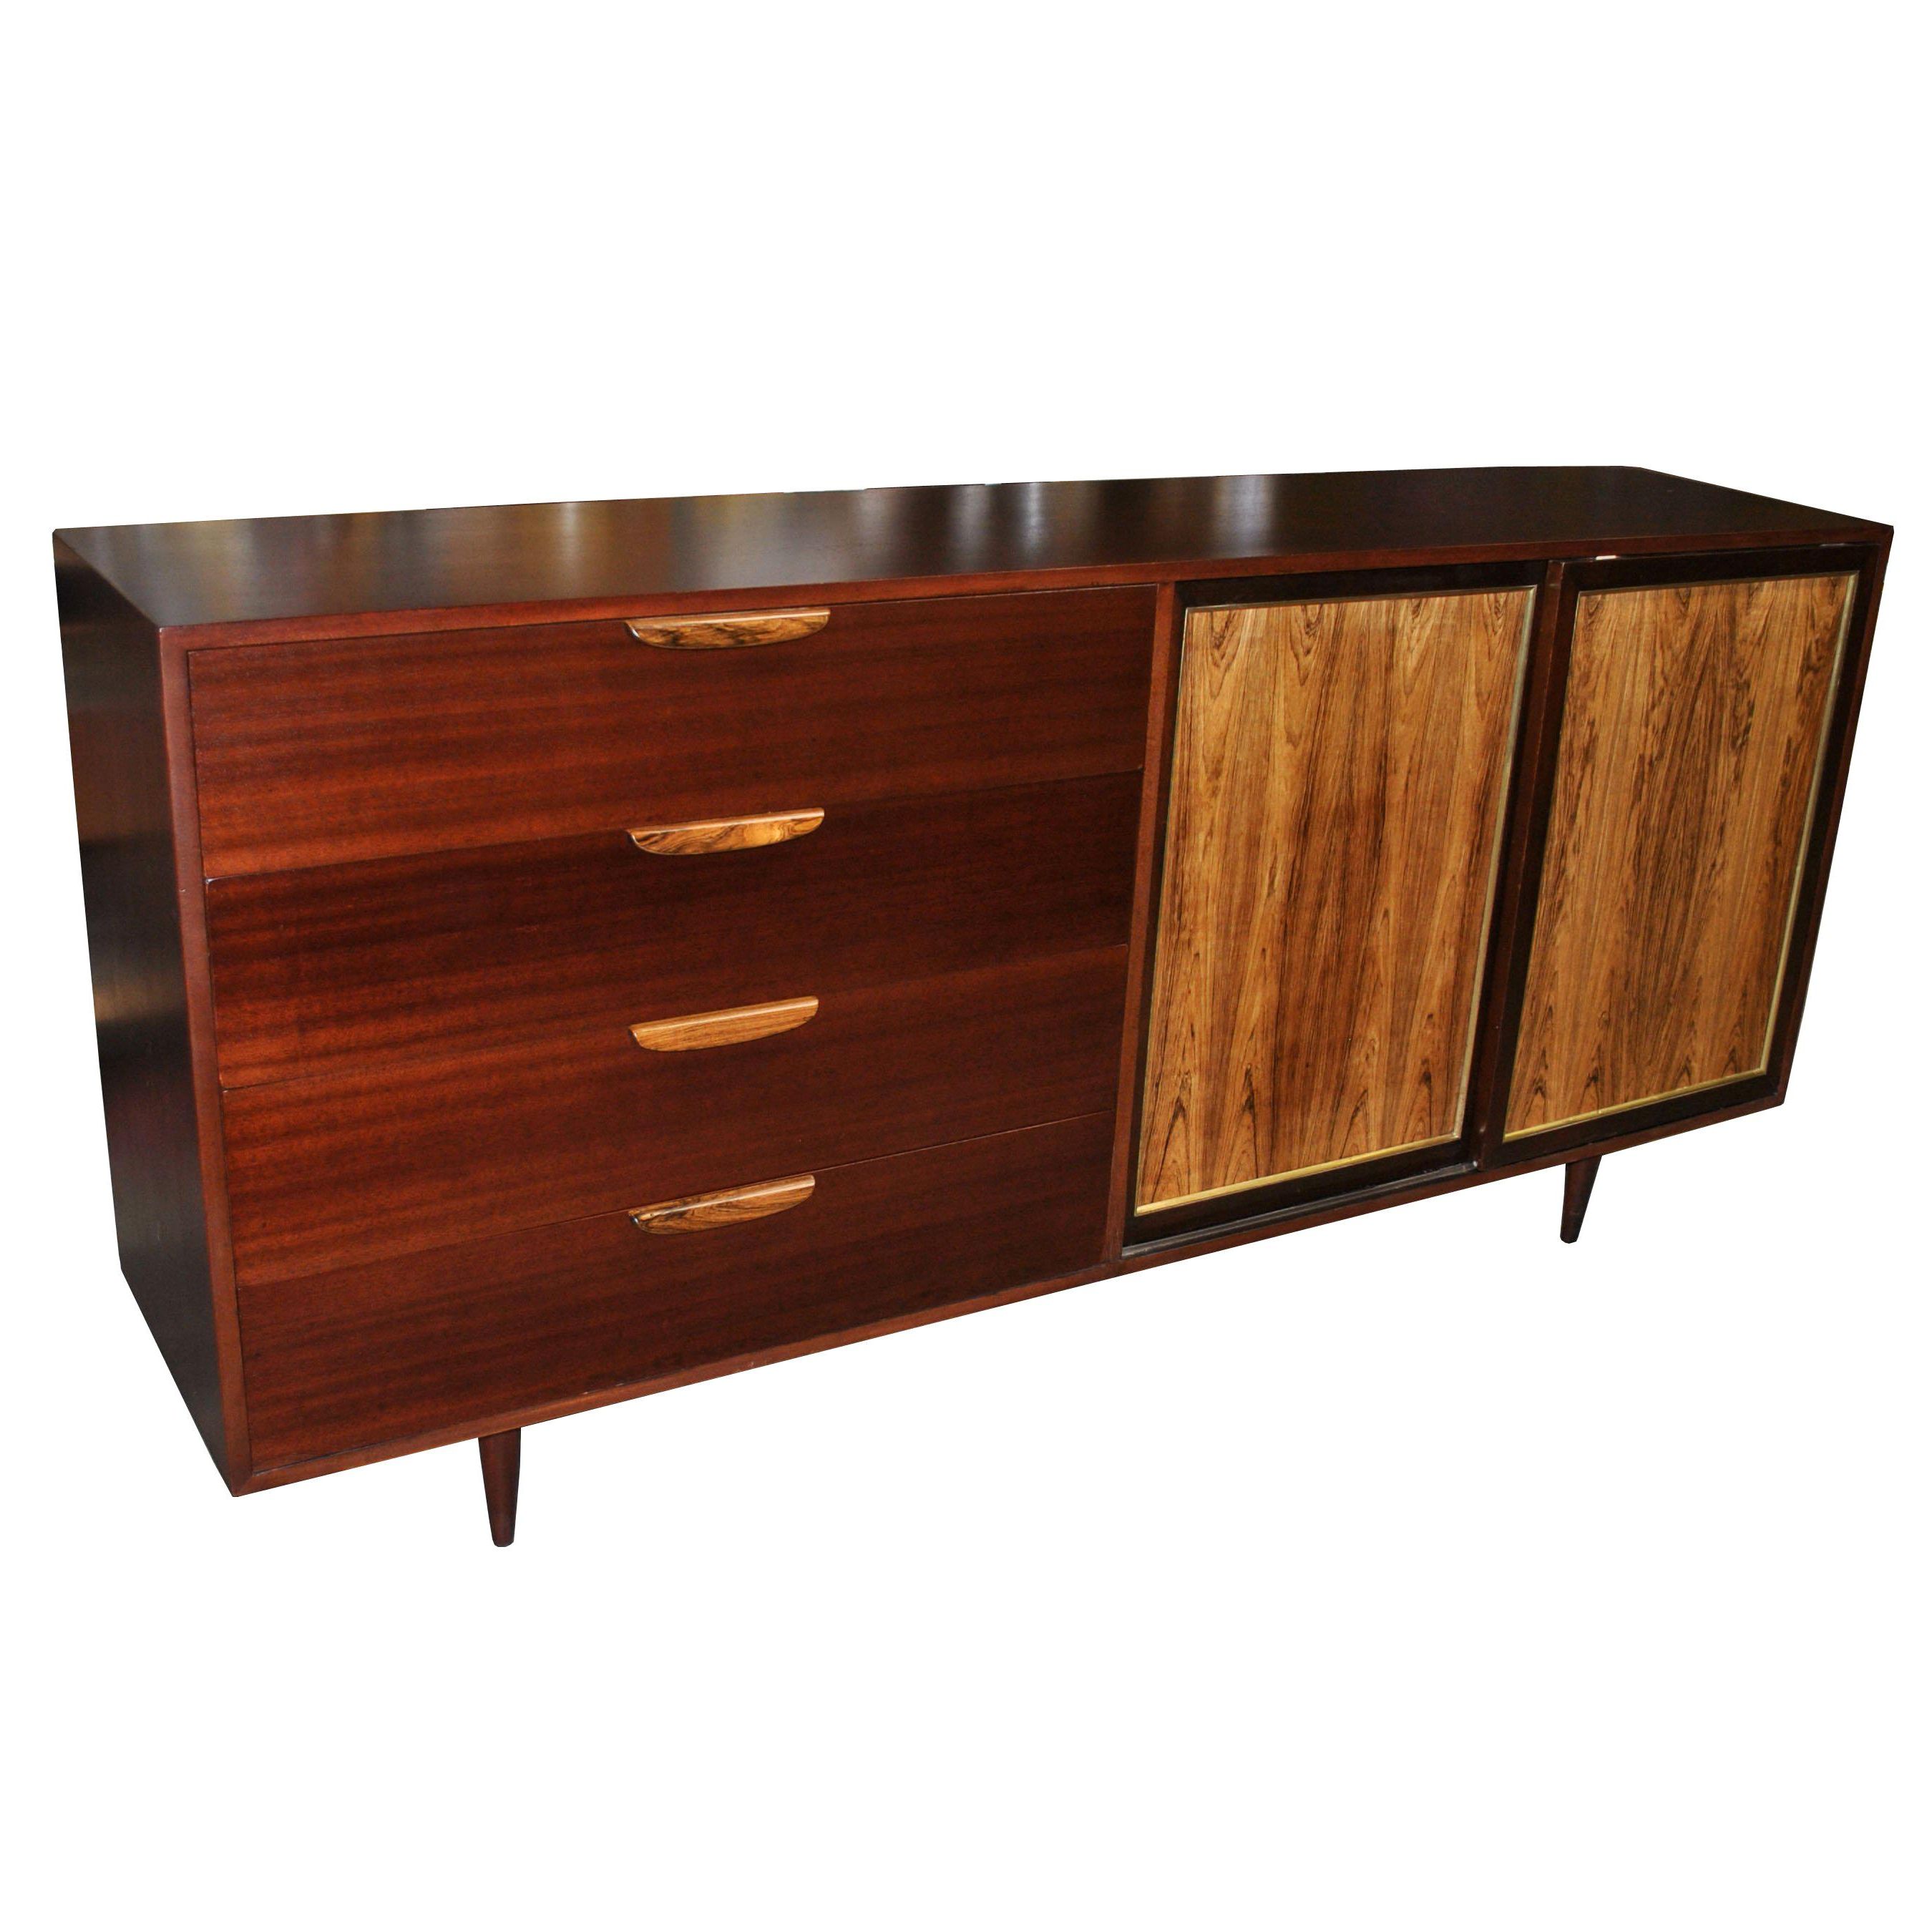 Vintage Florence Knoll Credenza With Graffiti Reimagined Intended For Retro Holistic Credenzas (View 9 of 20)